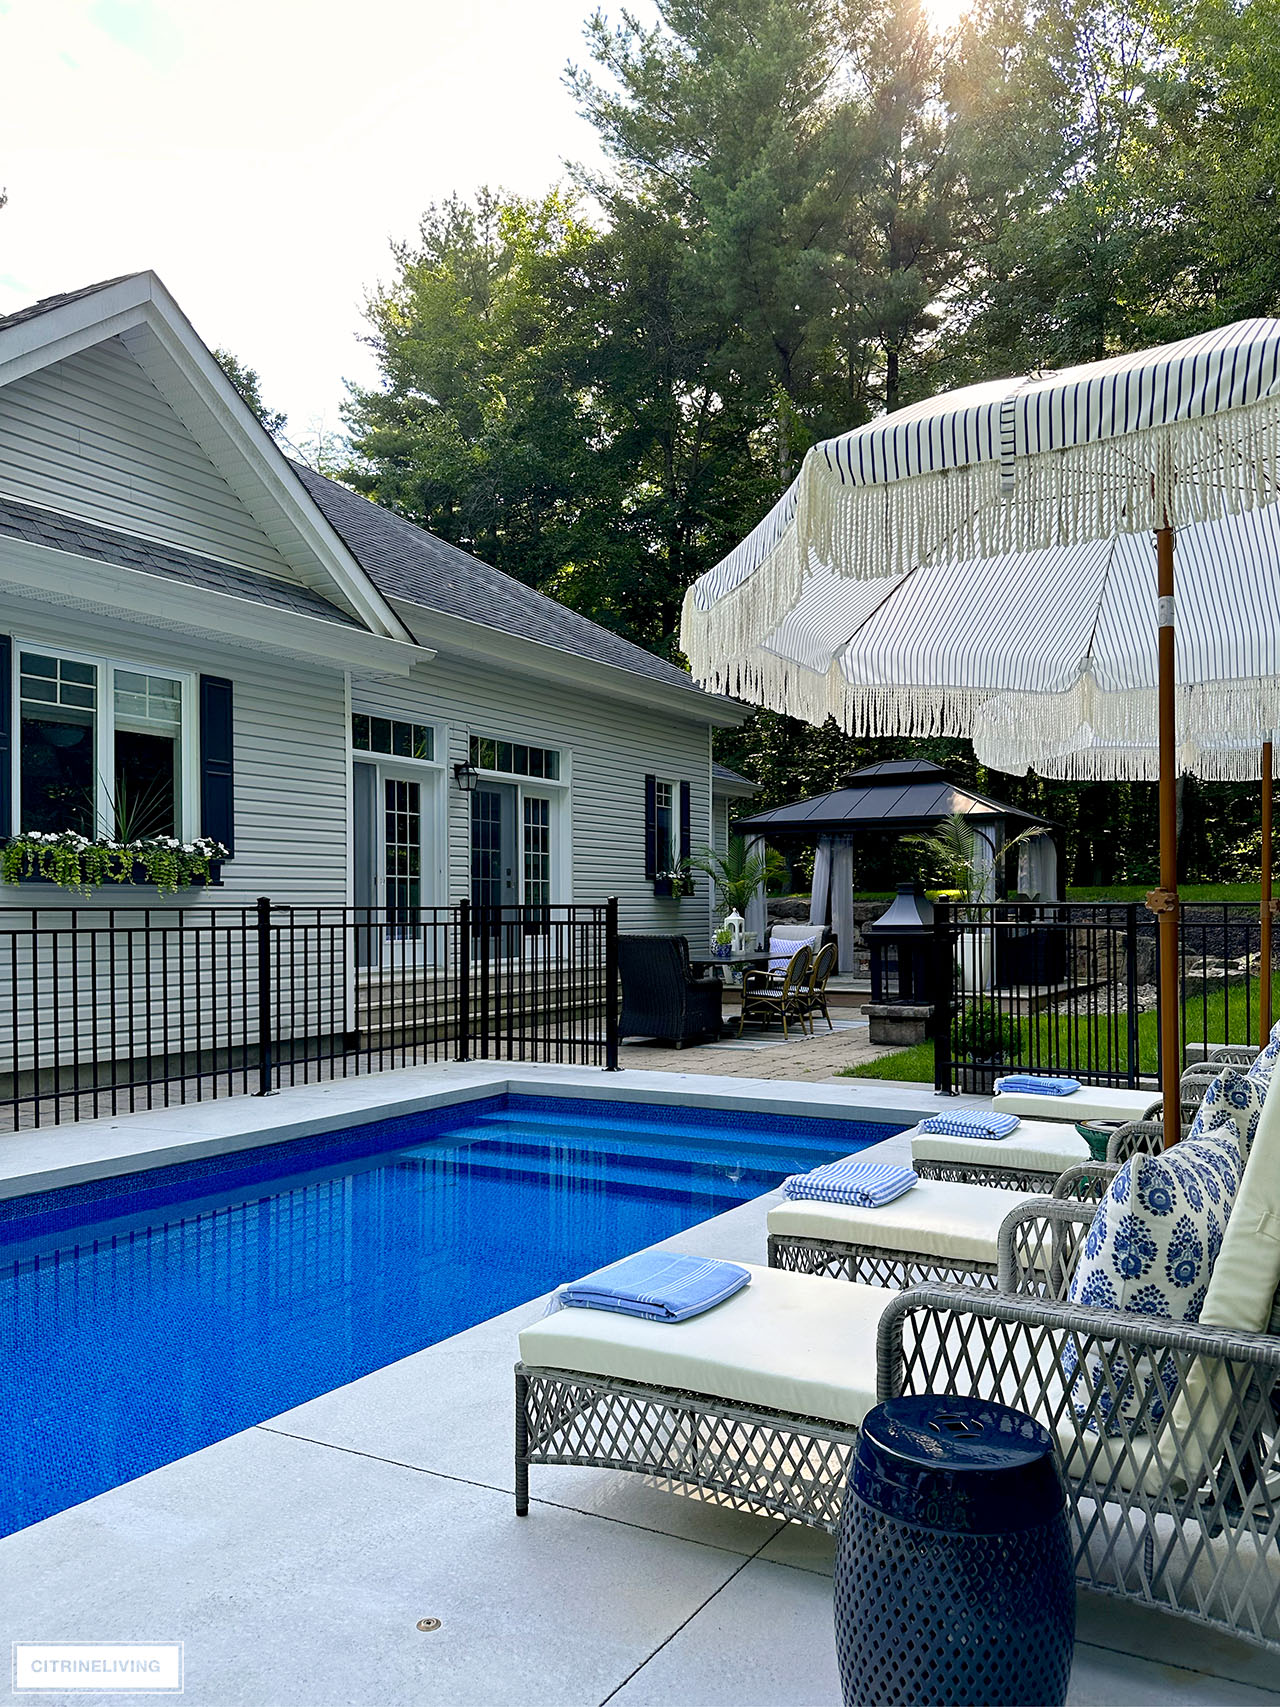 Resort style in ground pool with loungers and umbrellas, facing the back elevation of a traditional, east coast style home.